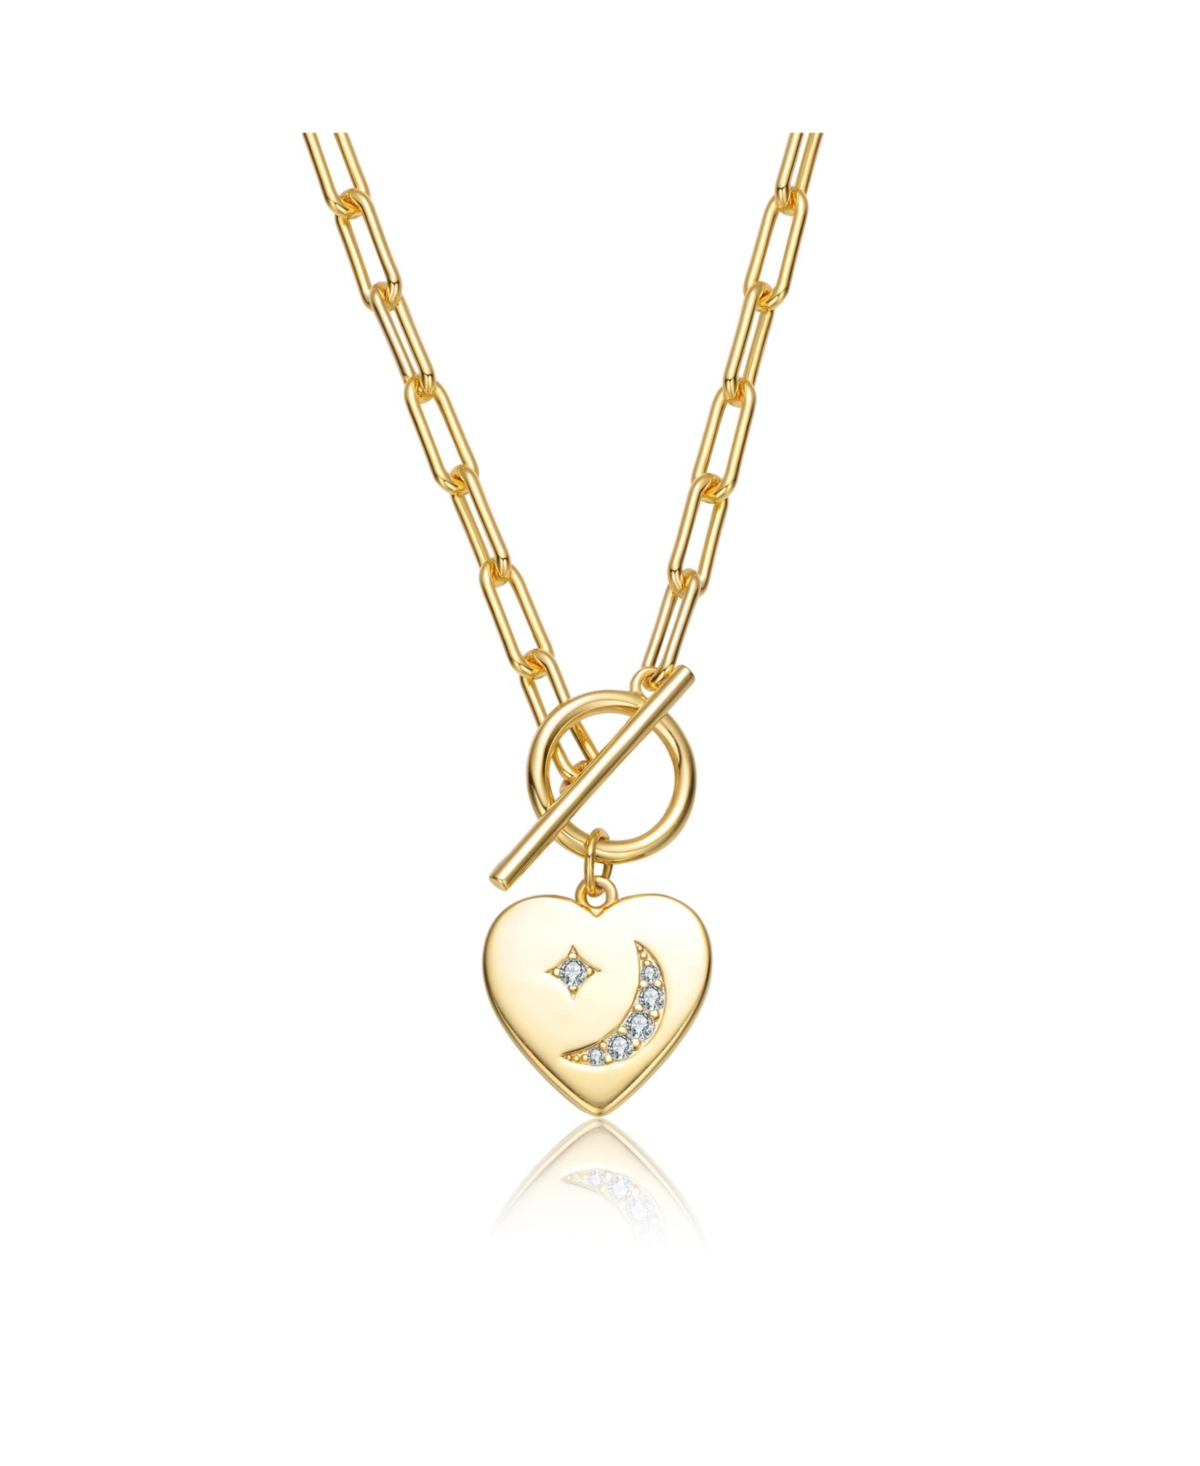 Teens/Young Adults 14K Gold Plated Cubic Zirconia Moon and Star Heart Charm Necklace - Gold